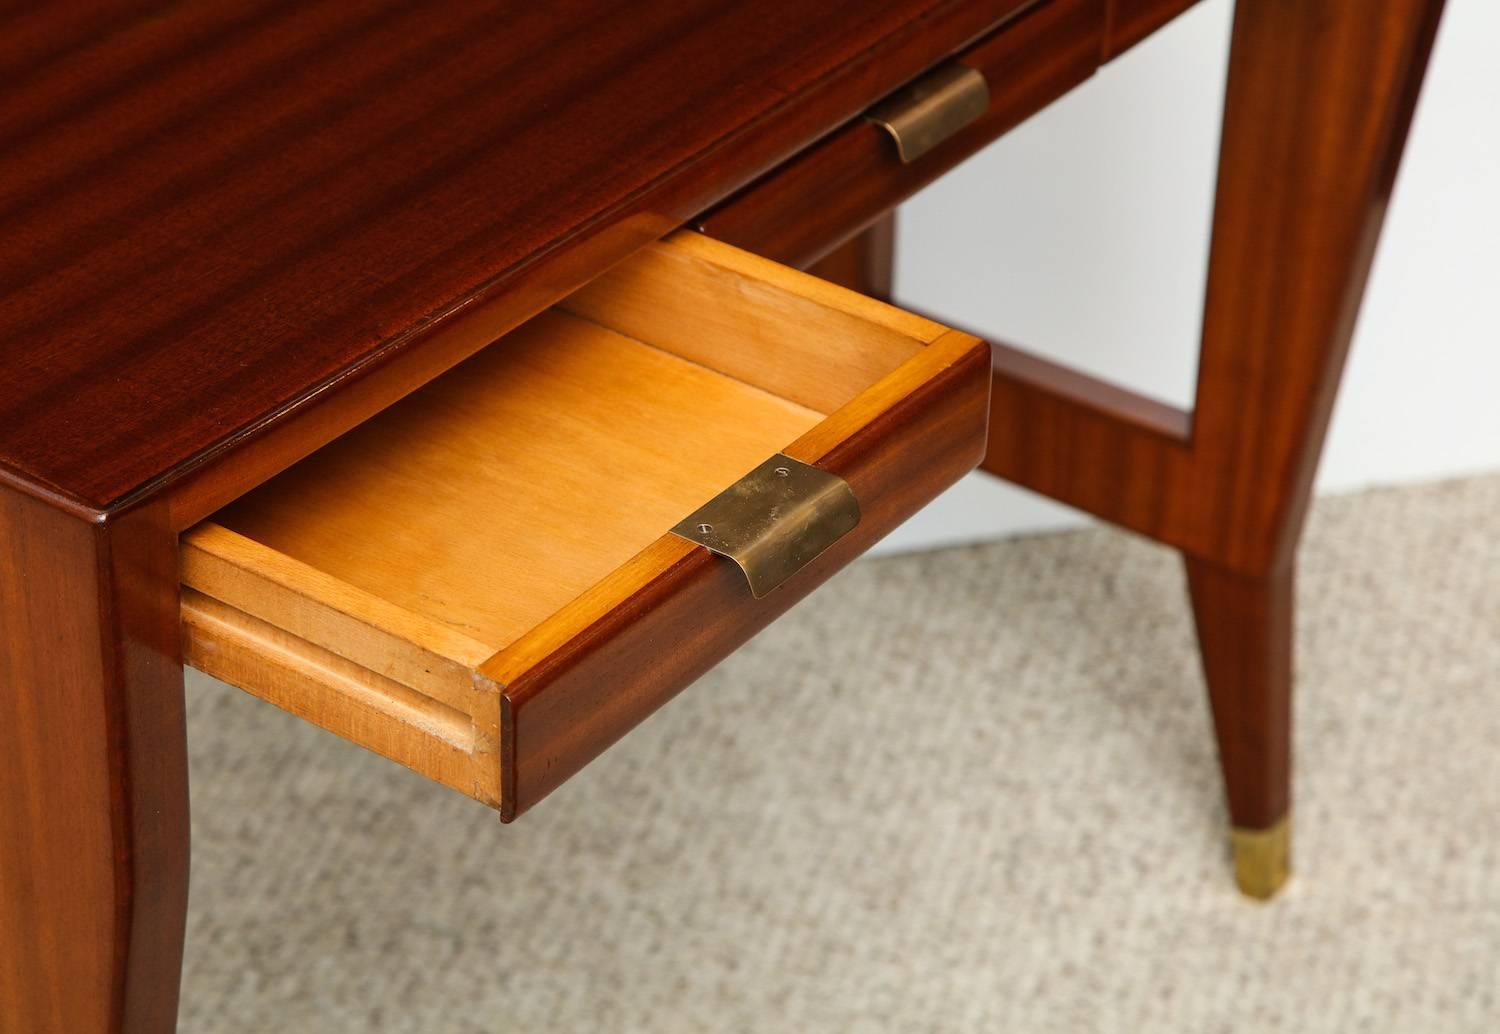 Rare desk / dressing table by Gio Ponti.
Three-drawer desk of ribbon mahogany, with tapered legs, side cut-outs, brass drawer pulls and wraps at the feet. Produced by Giordano Chiesa.